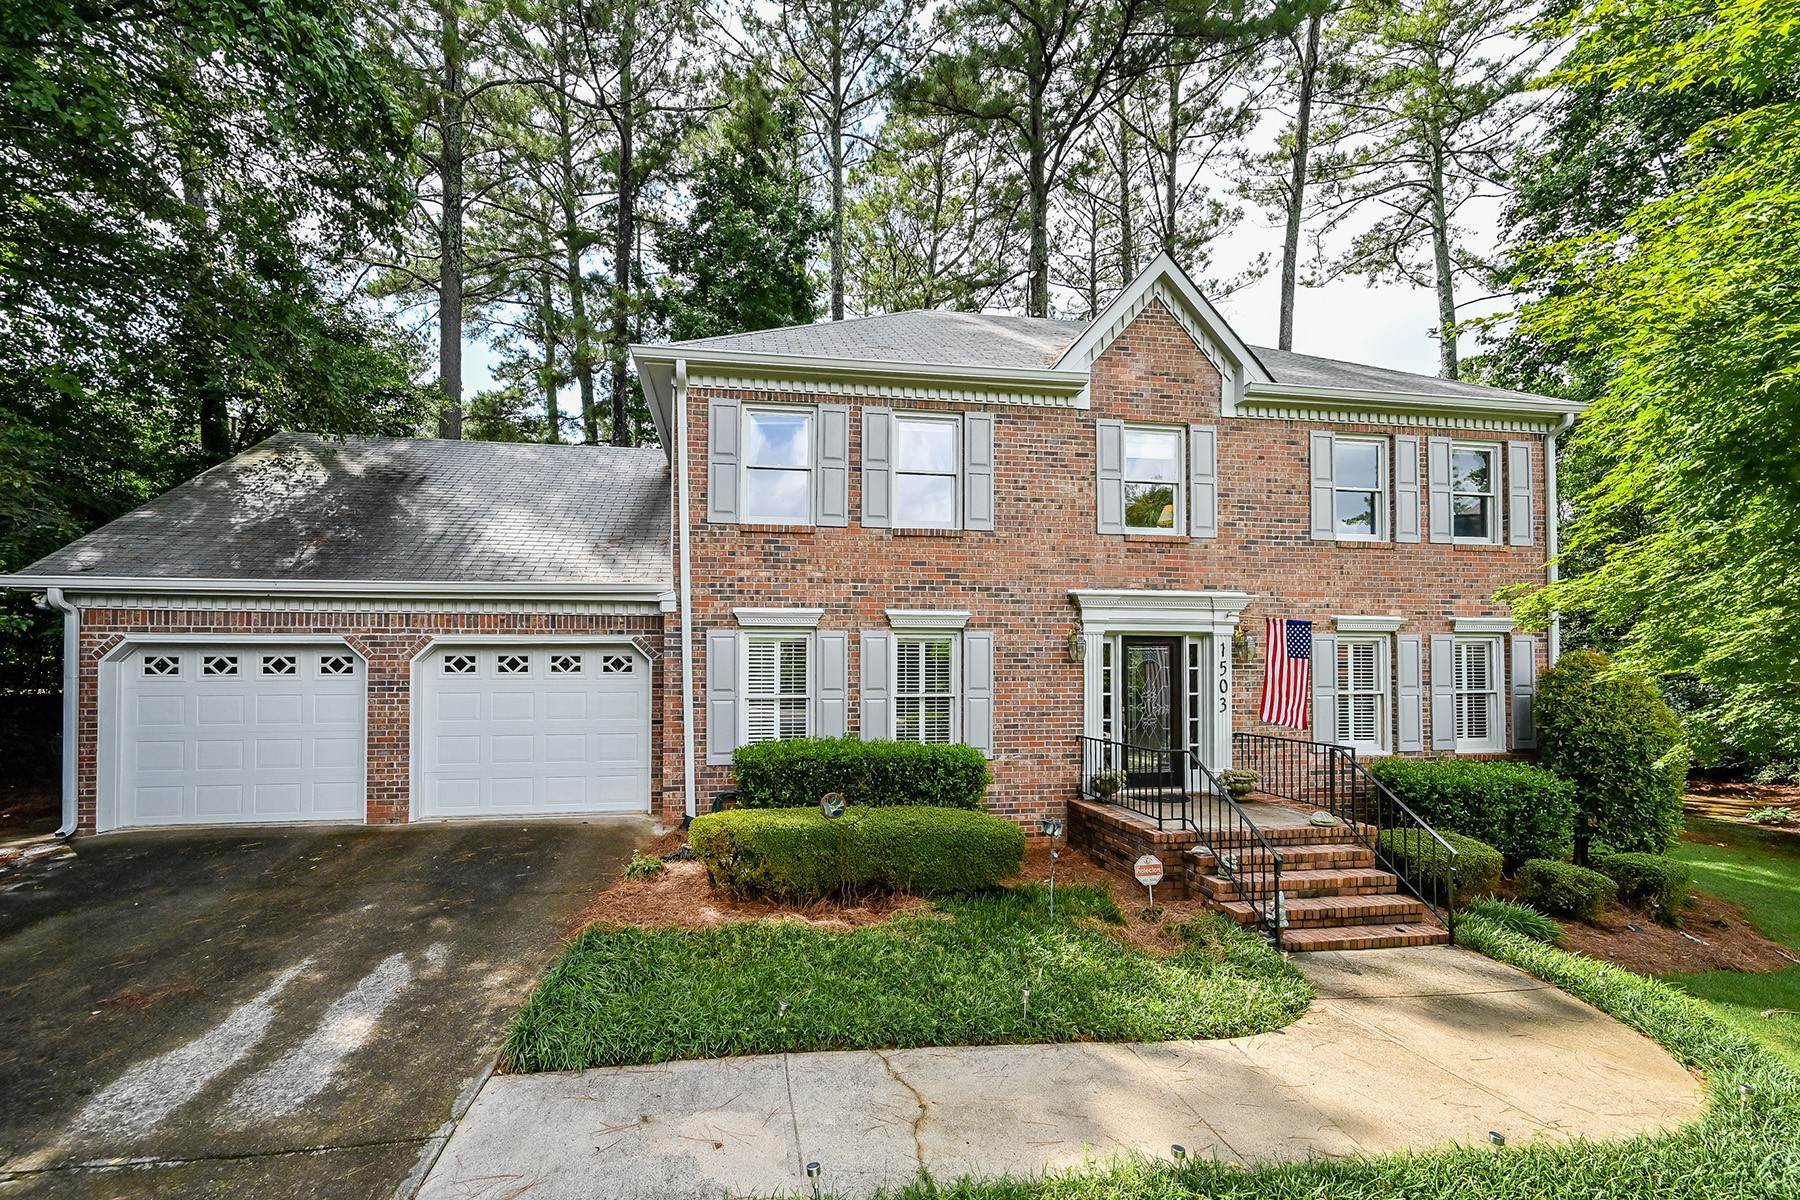 Single Family Homes for Sale at Prime Brick Traditional in Sought-After School District 1503 Quarter Horse Court Roswell, Georgia 30075 United States